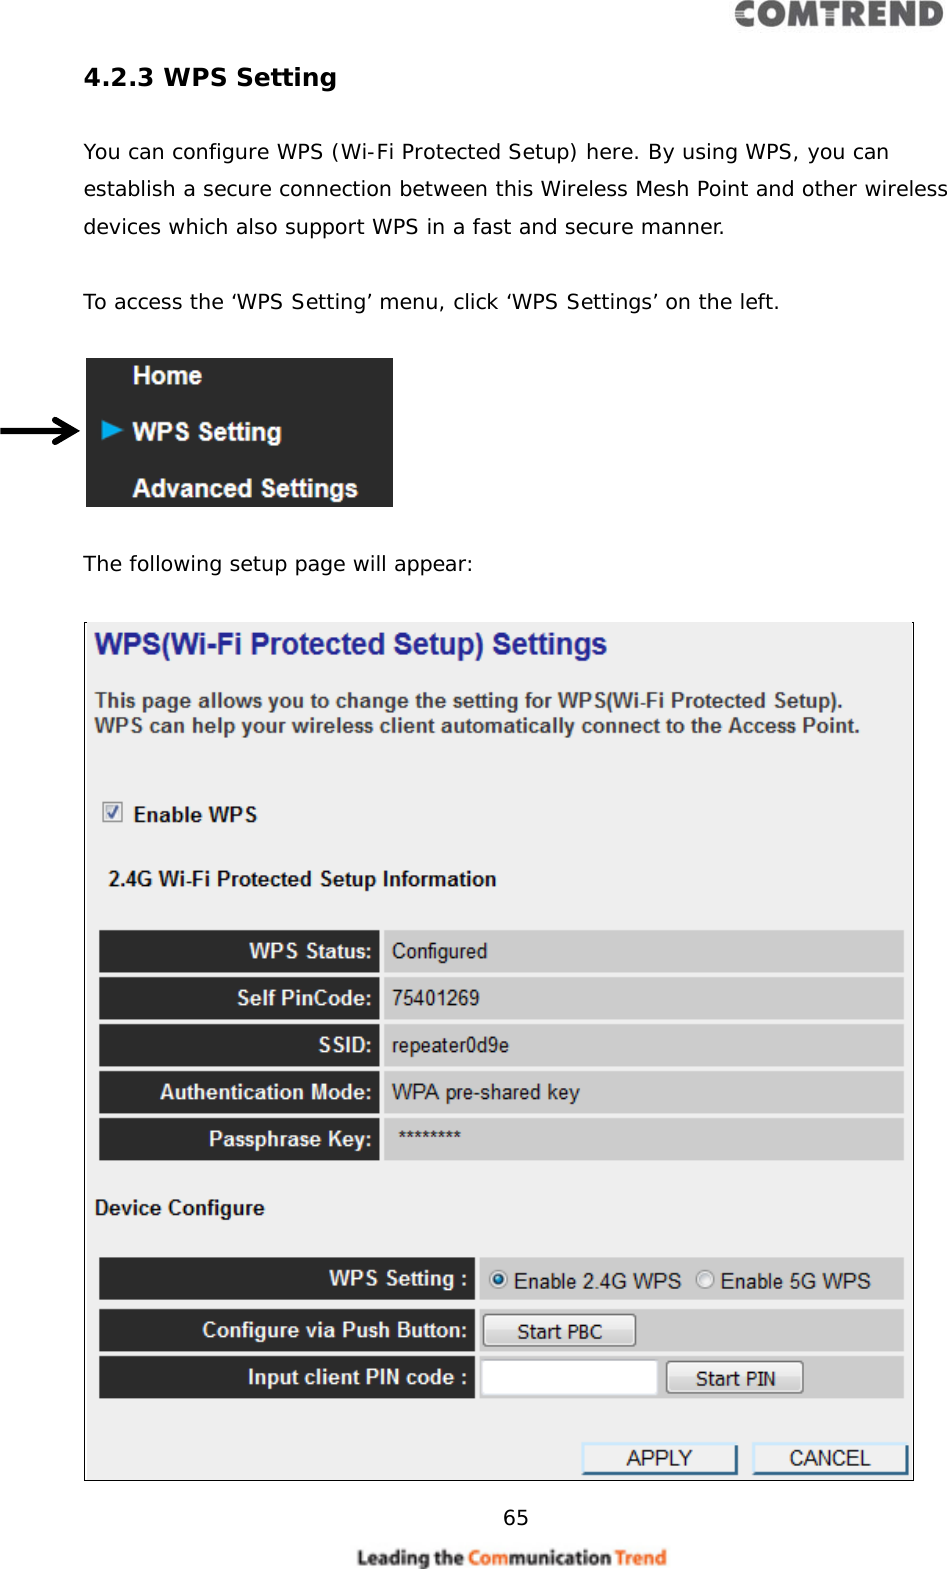     65  4.2.3 WPS Setting  You can configure WPS (Wi-Fi Protected Setup) here. By using WPS, you can establish a secure connection between this Wireless Mesh Point and other wireless devices which also support WPS in a fast and secure manner.  To access the ‘WPS Setting’ menu, click ‘WPS Settings’ on the left.    The following setup page will appear:   